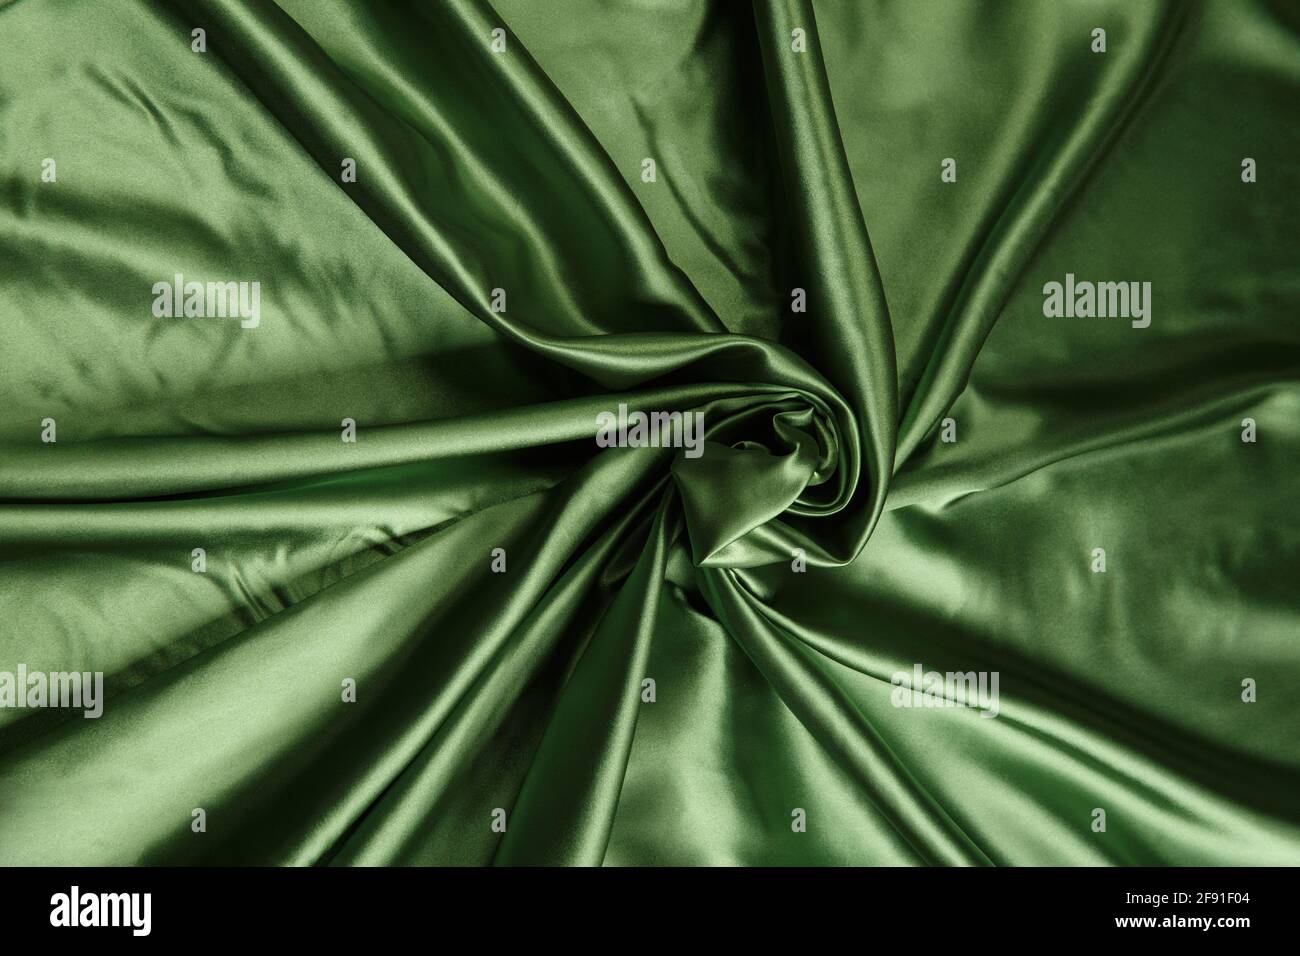 Colored green textile satin fabric folded in folds and waves with highlights and texture shimmers in the light Stock Photo